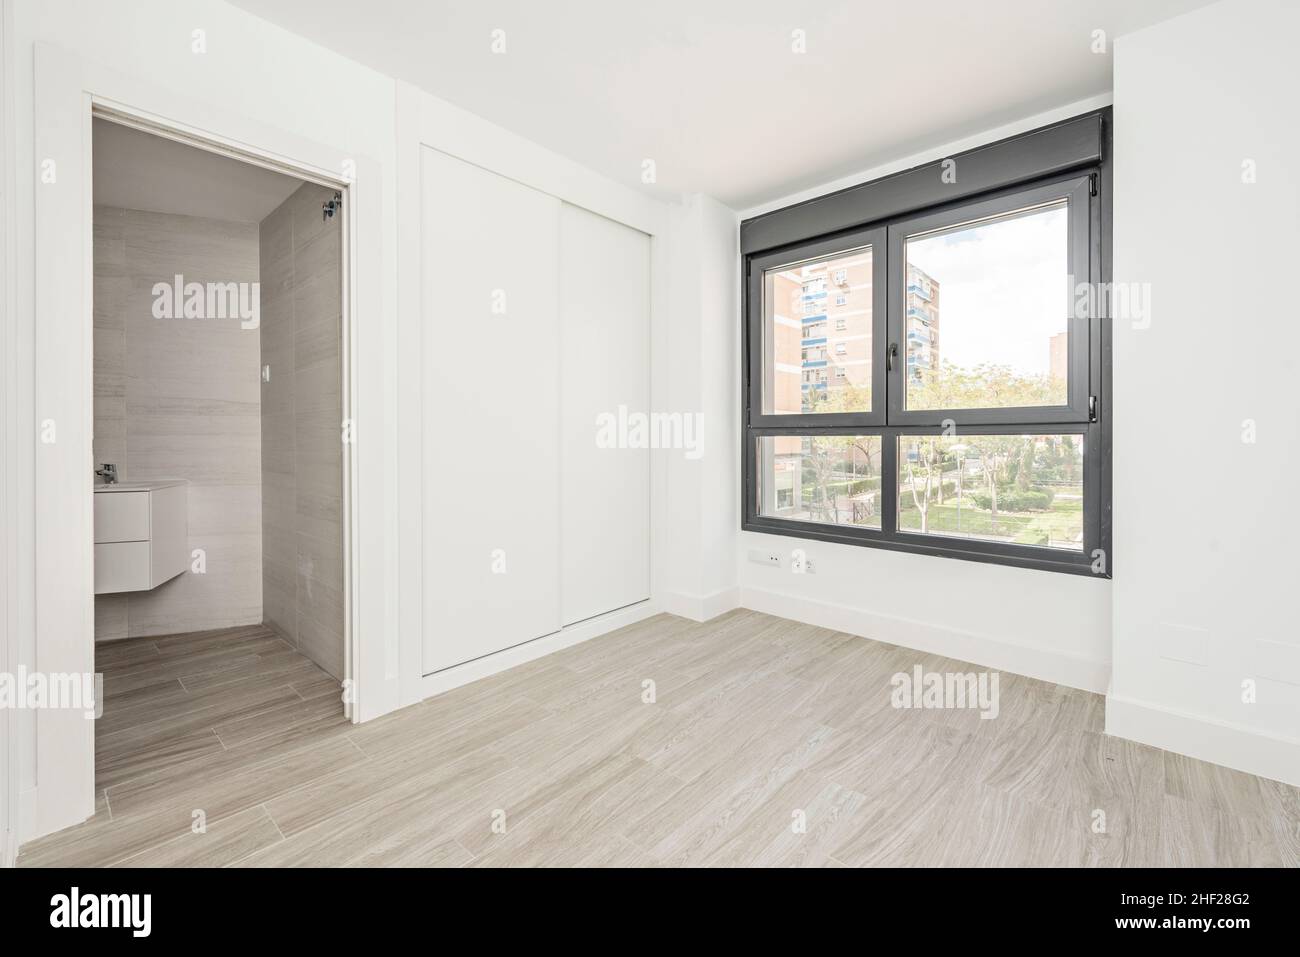 Room with built-in wardrobe with white sliding doors, en suite bathroom and large black aluminum window Stock Photo